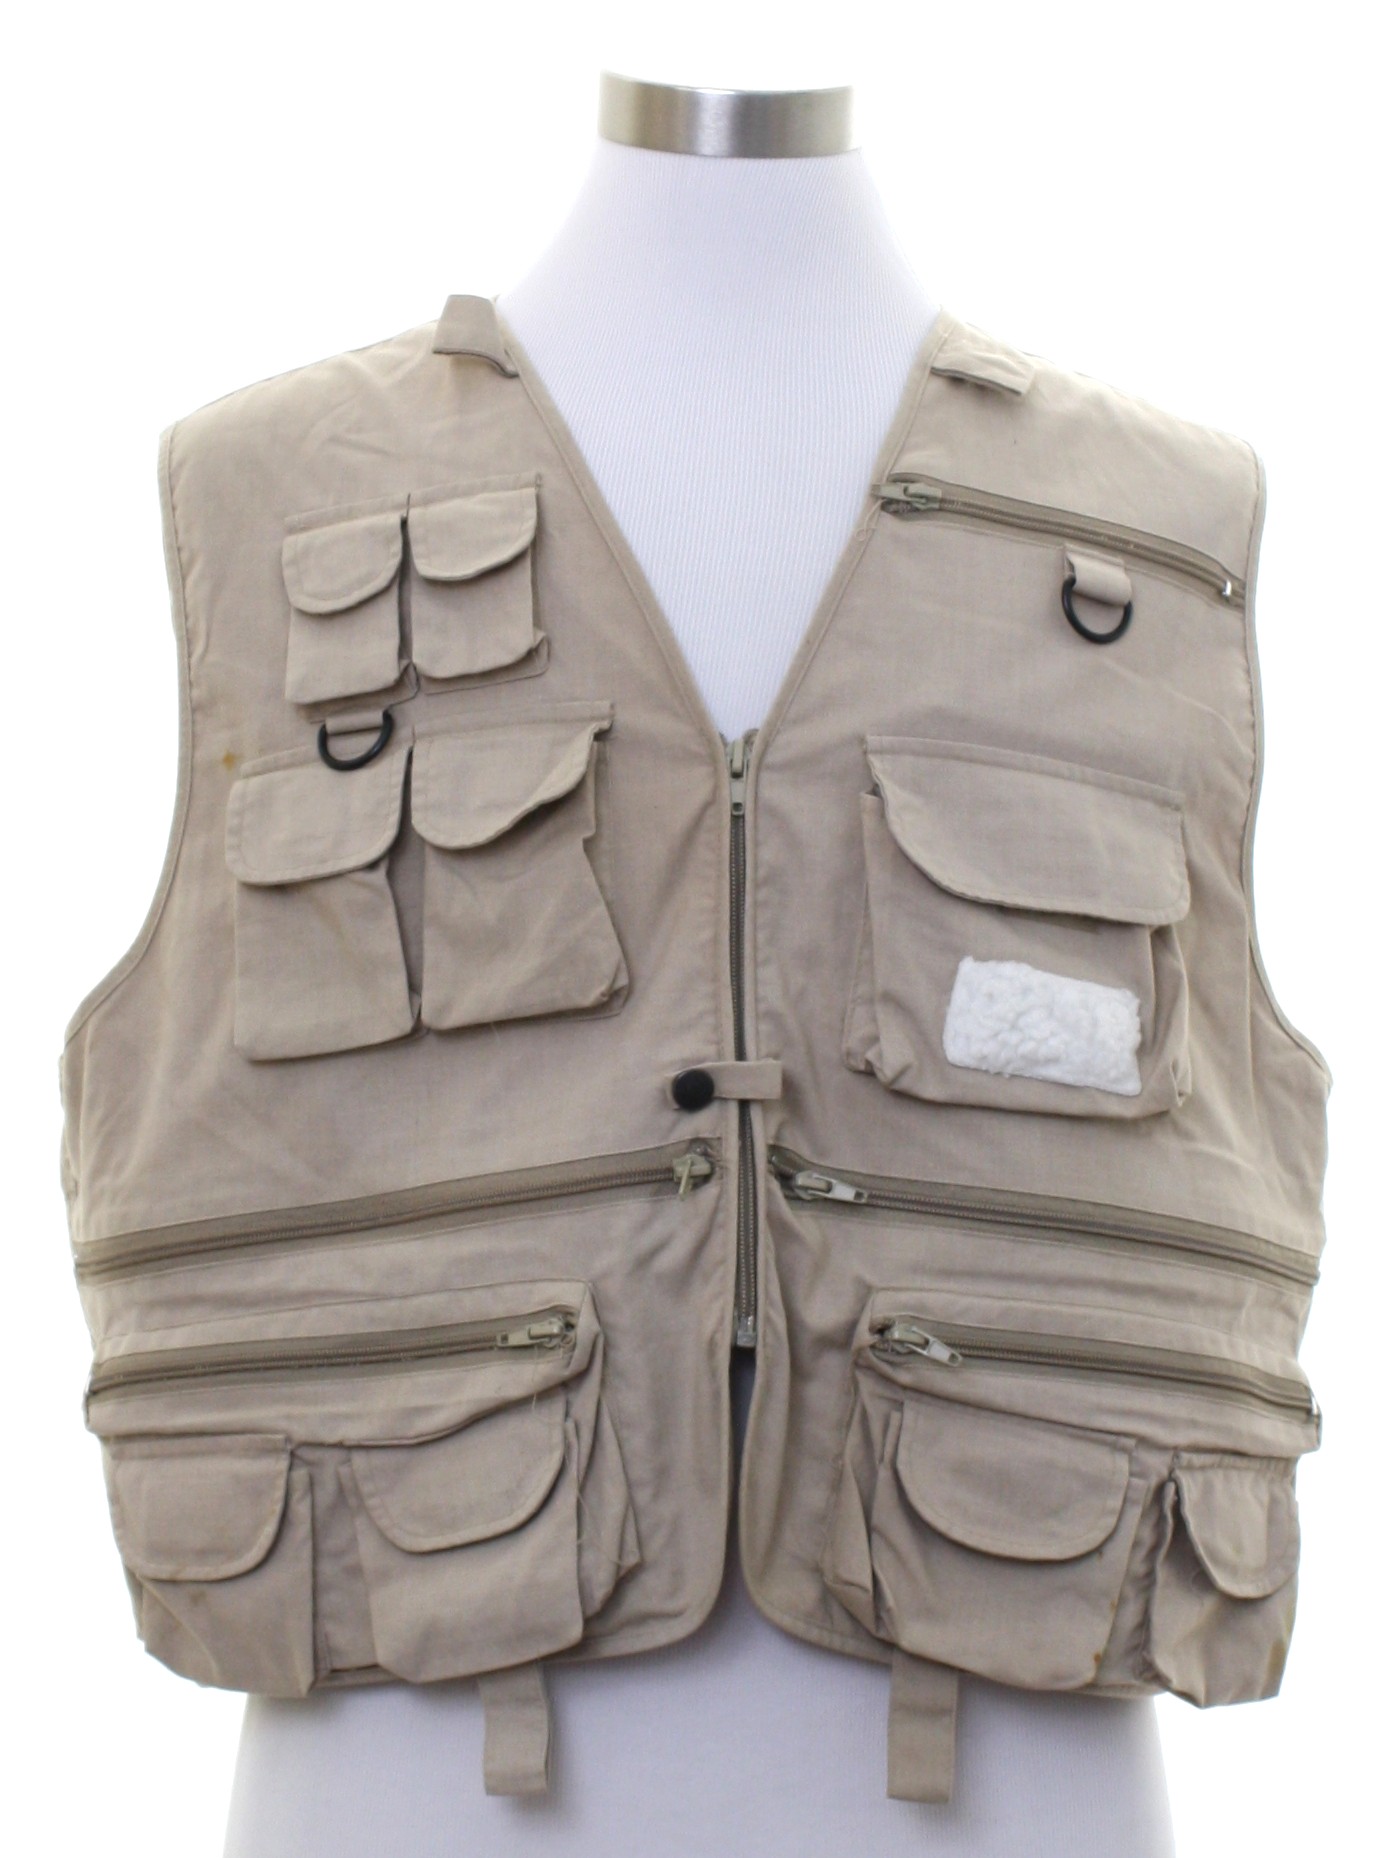 Retro 1980s Vest: 80s -Crystal River- Mens khaki tan cotton poplin fishing  vest with zipper front closure, multiple zippered inset and patch pockets,  small upper flapped patch pockets, and rear zippered patch